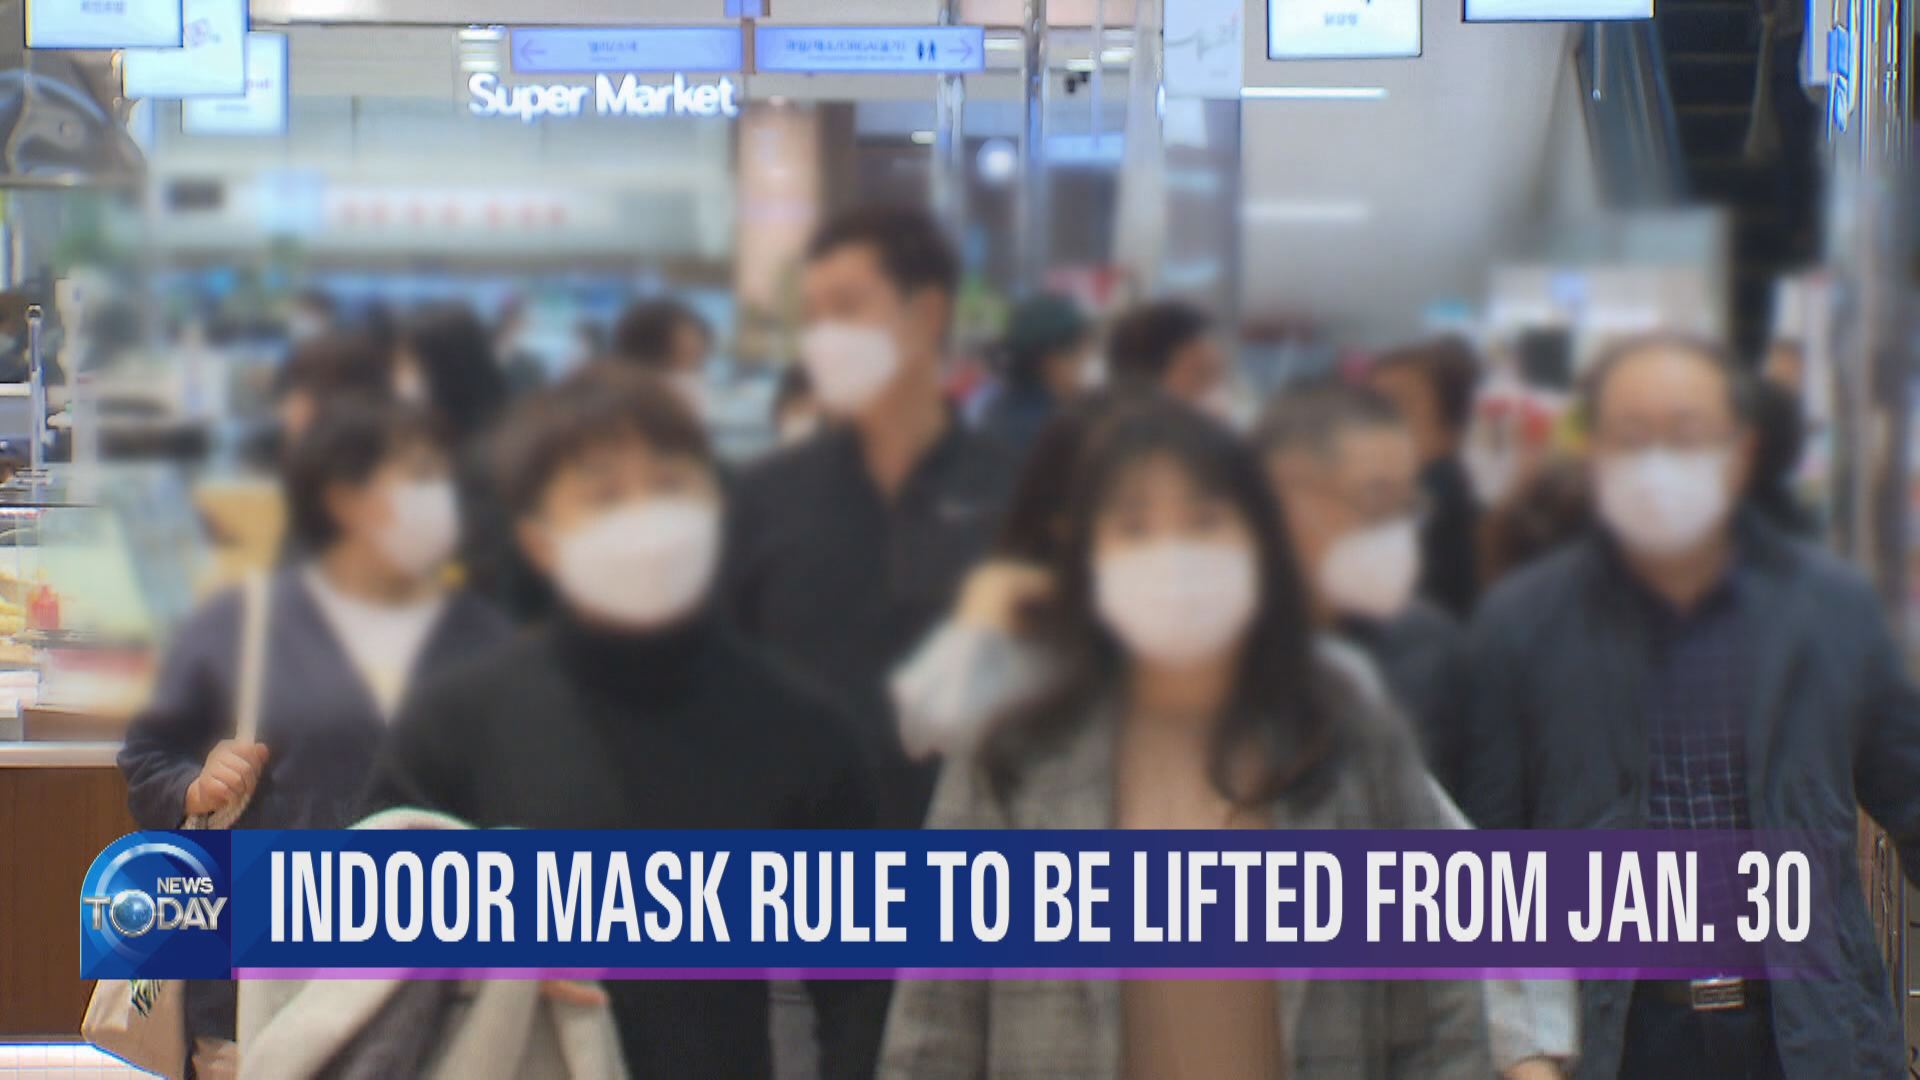 INDOOR MASK RULE TO BE LIFTED FROM JAN. 30